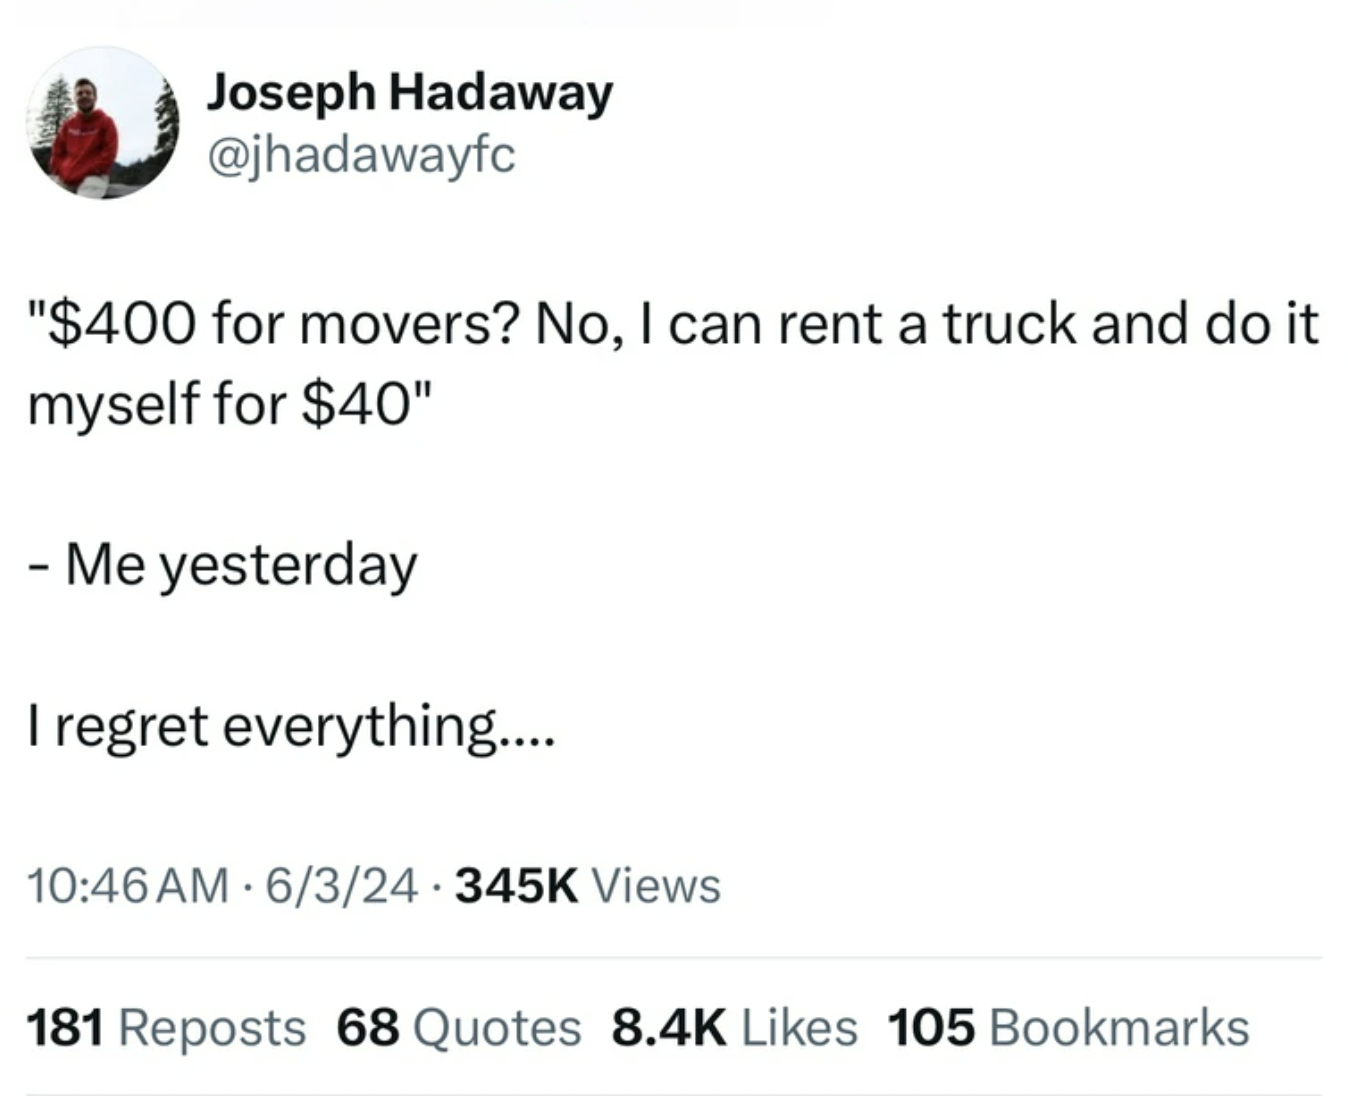 screenshot - Joseph Hadaway "$400 for movers? No, I can rent a truck and do it myself for $40" Me yesterday I regret everything.... 63 Views 181 Reposts 68 Quotes 105 Bookmarks